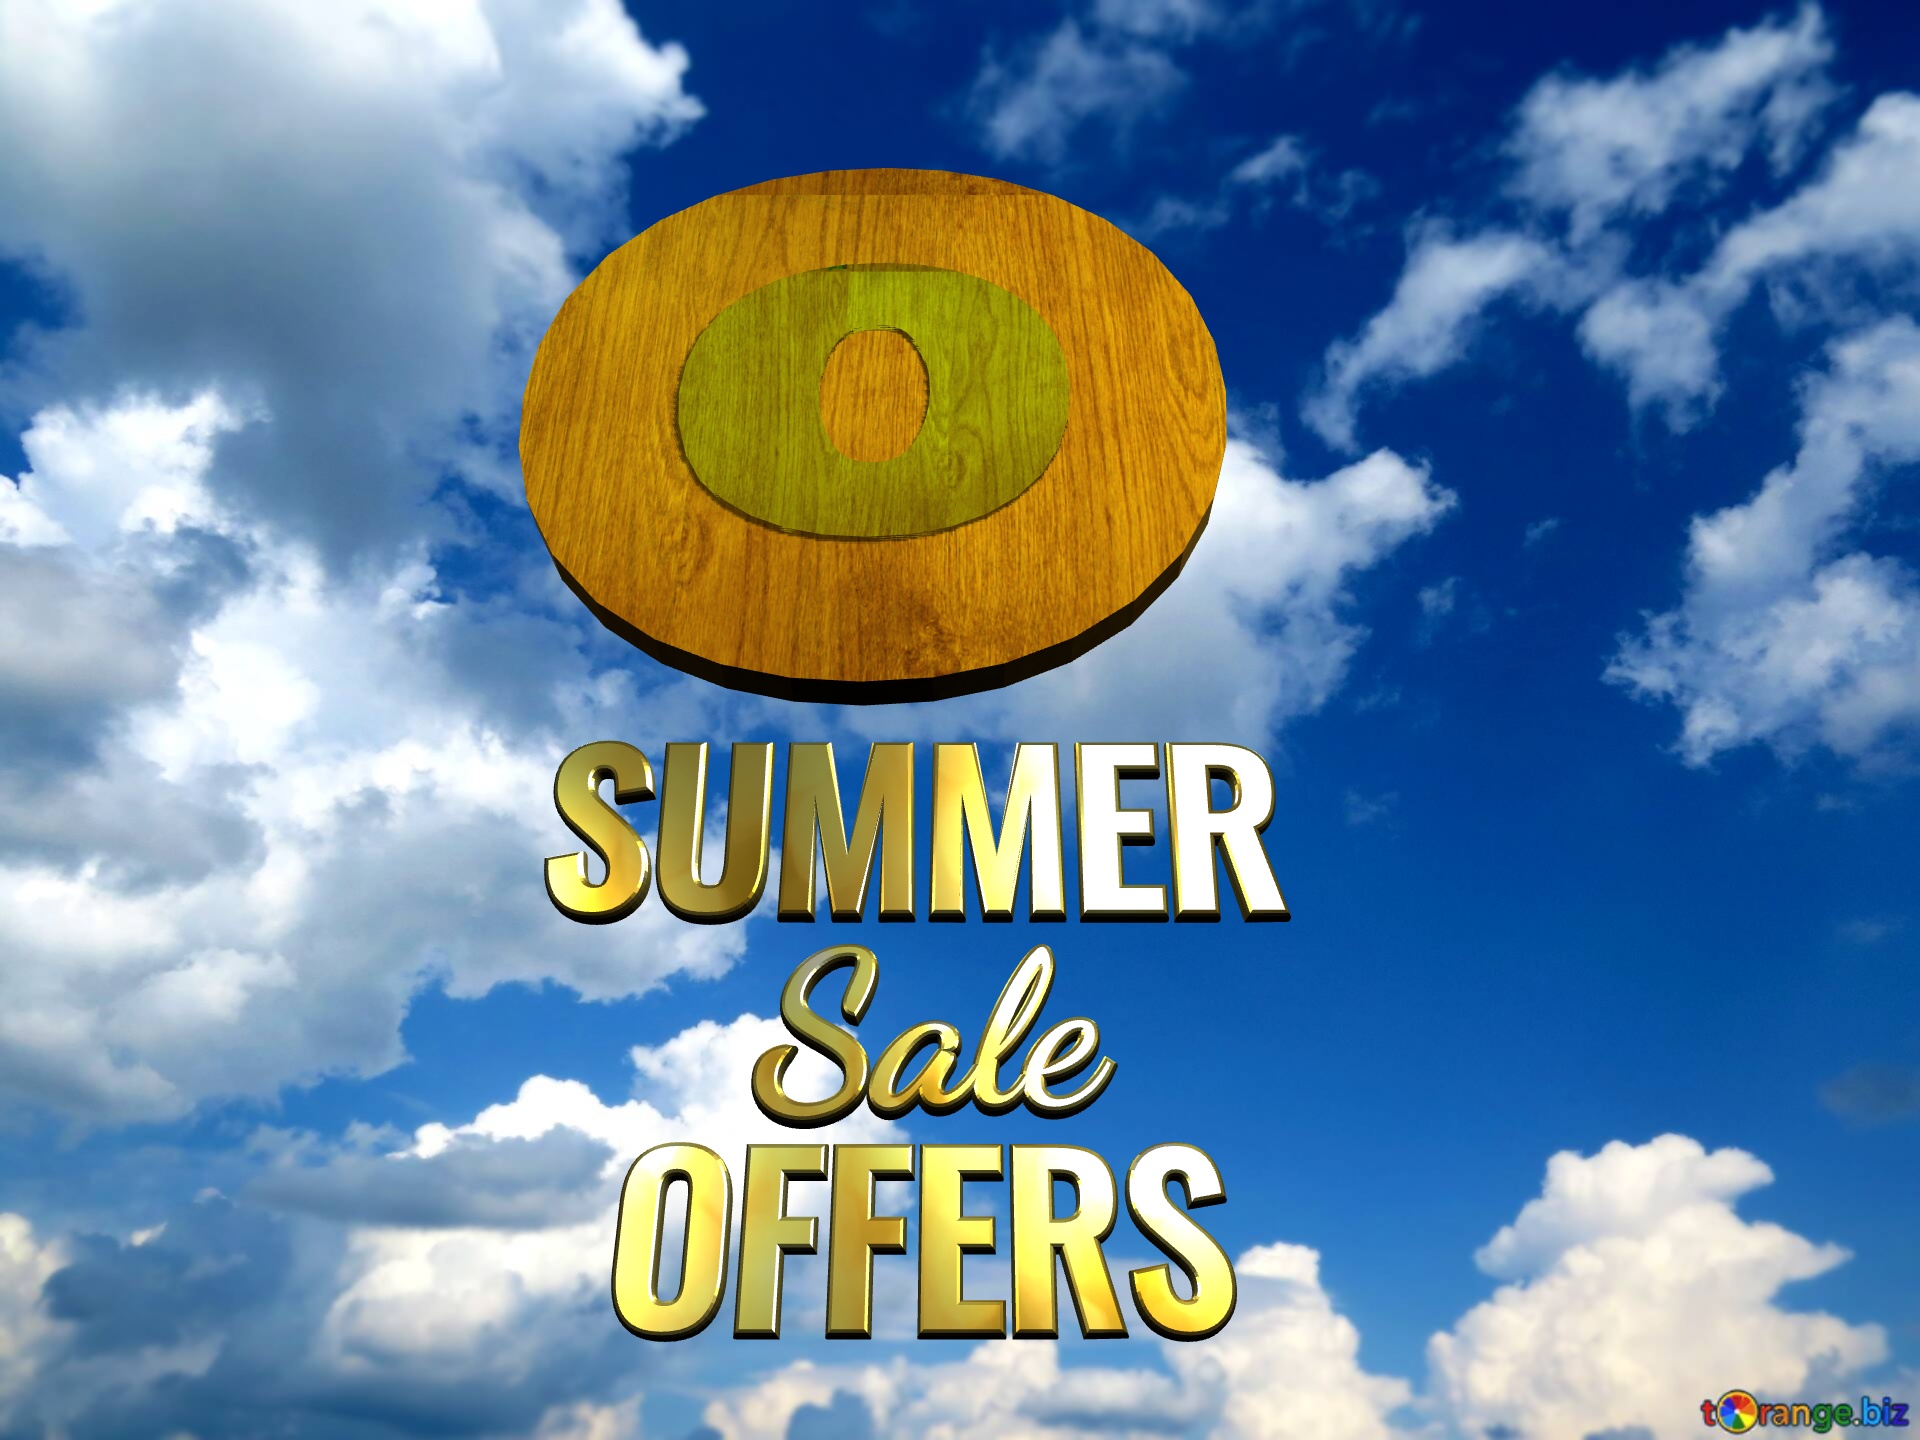 SUMMER OFFERS Sale clear sky background №0